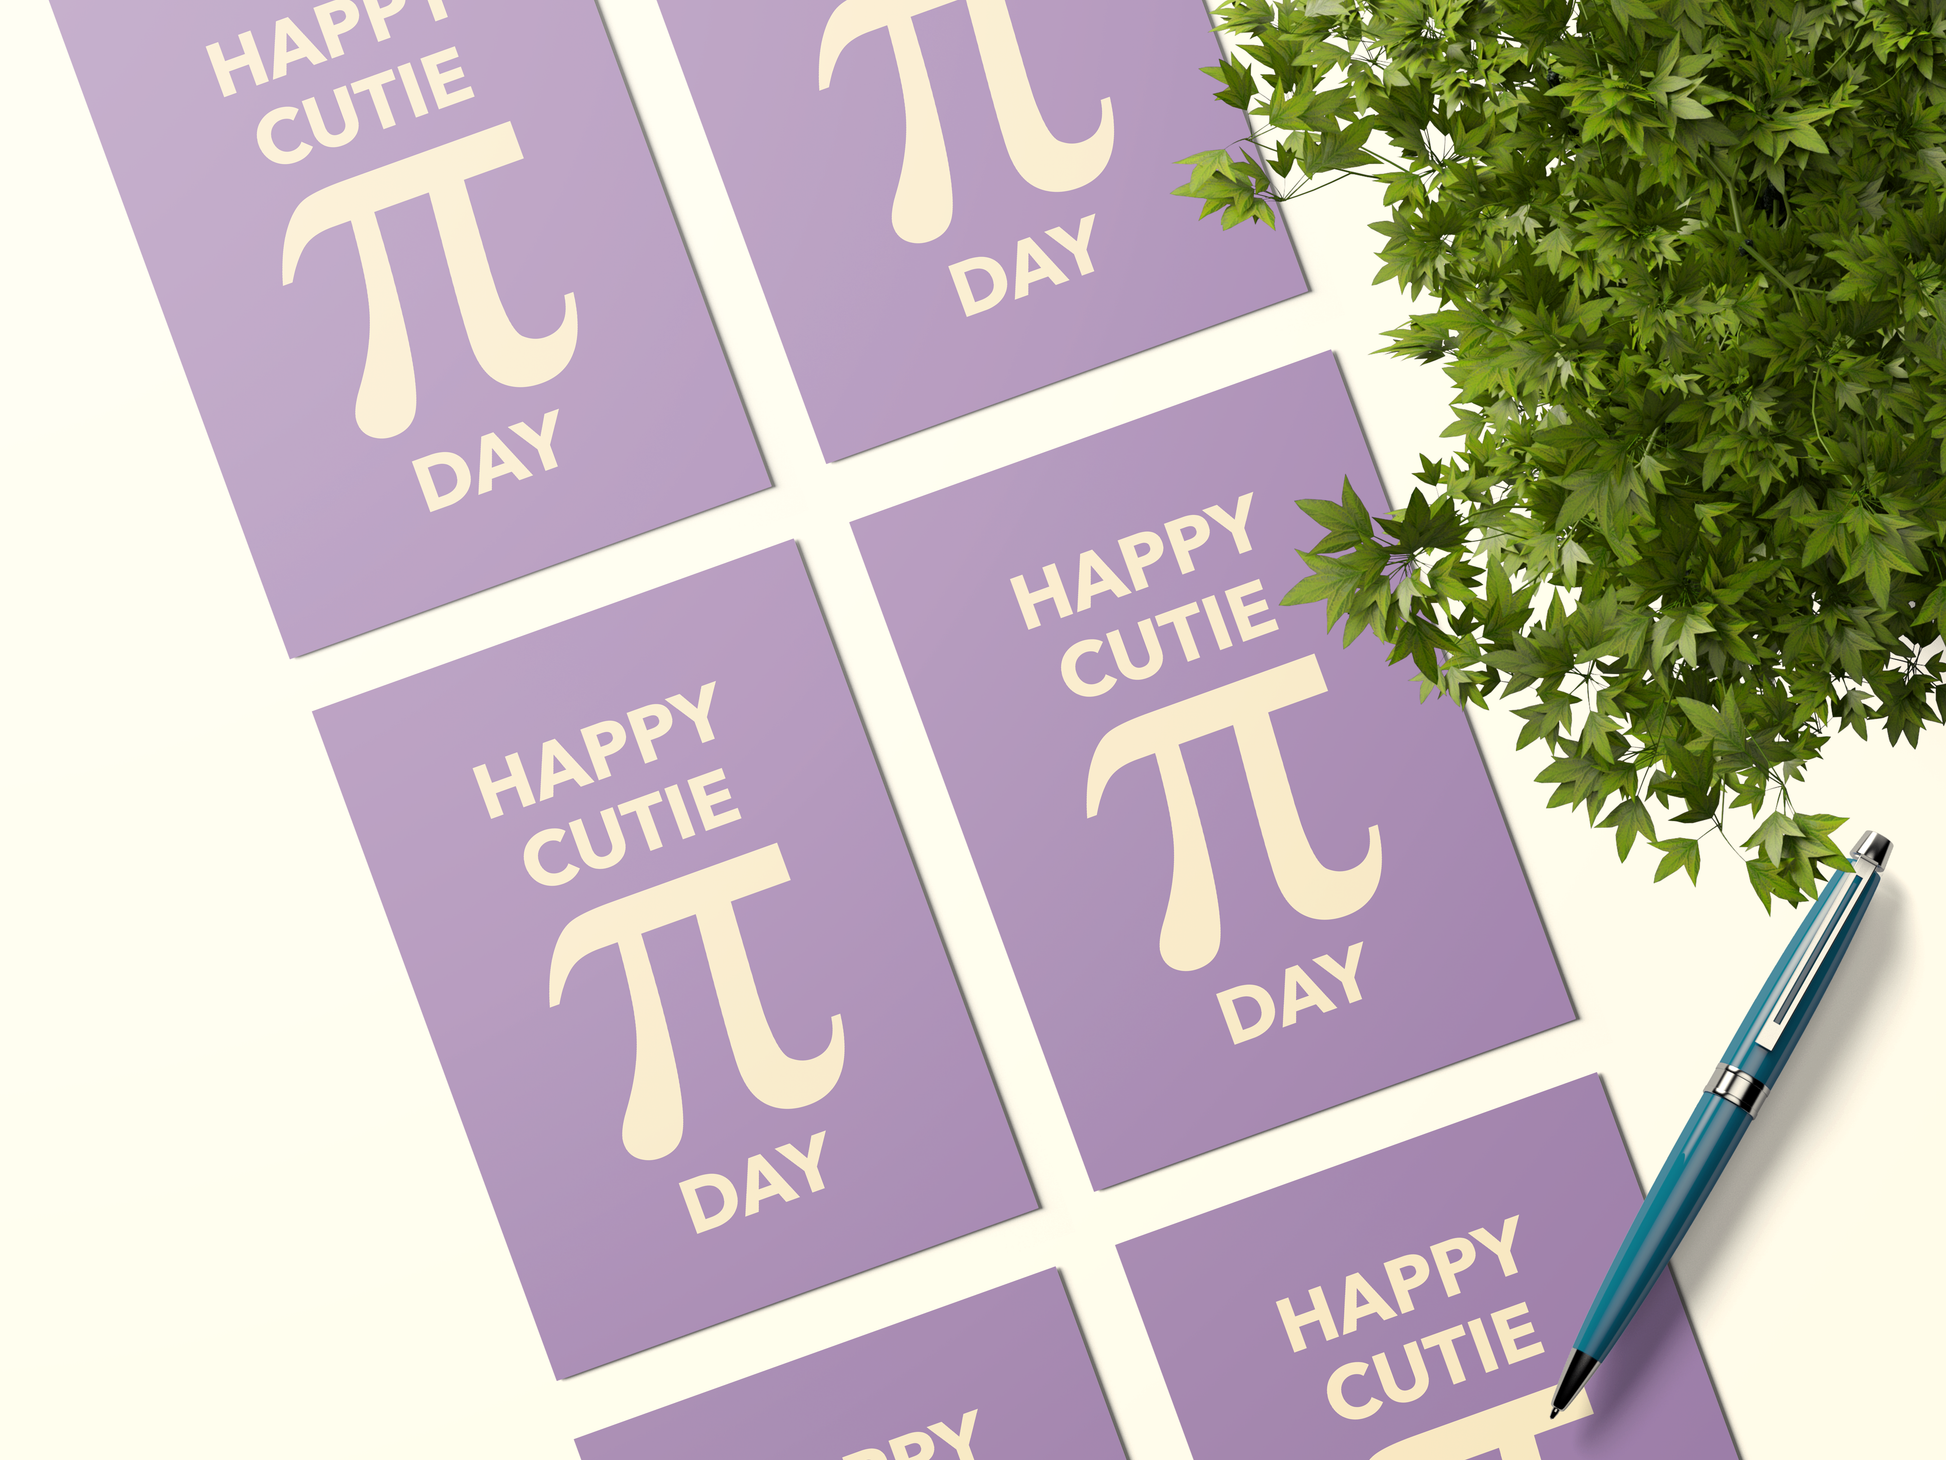 Happy Cutie Pi Day Postcard Bundle: Pack Of 5 or 10 Postcards..